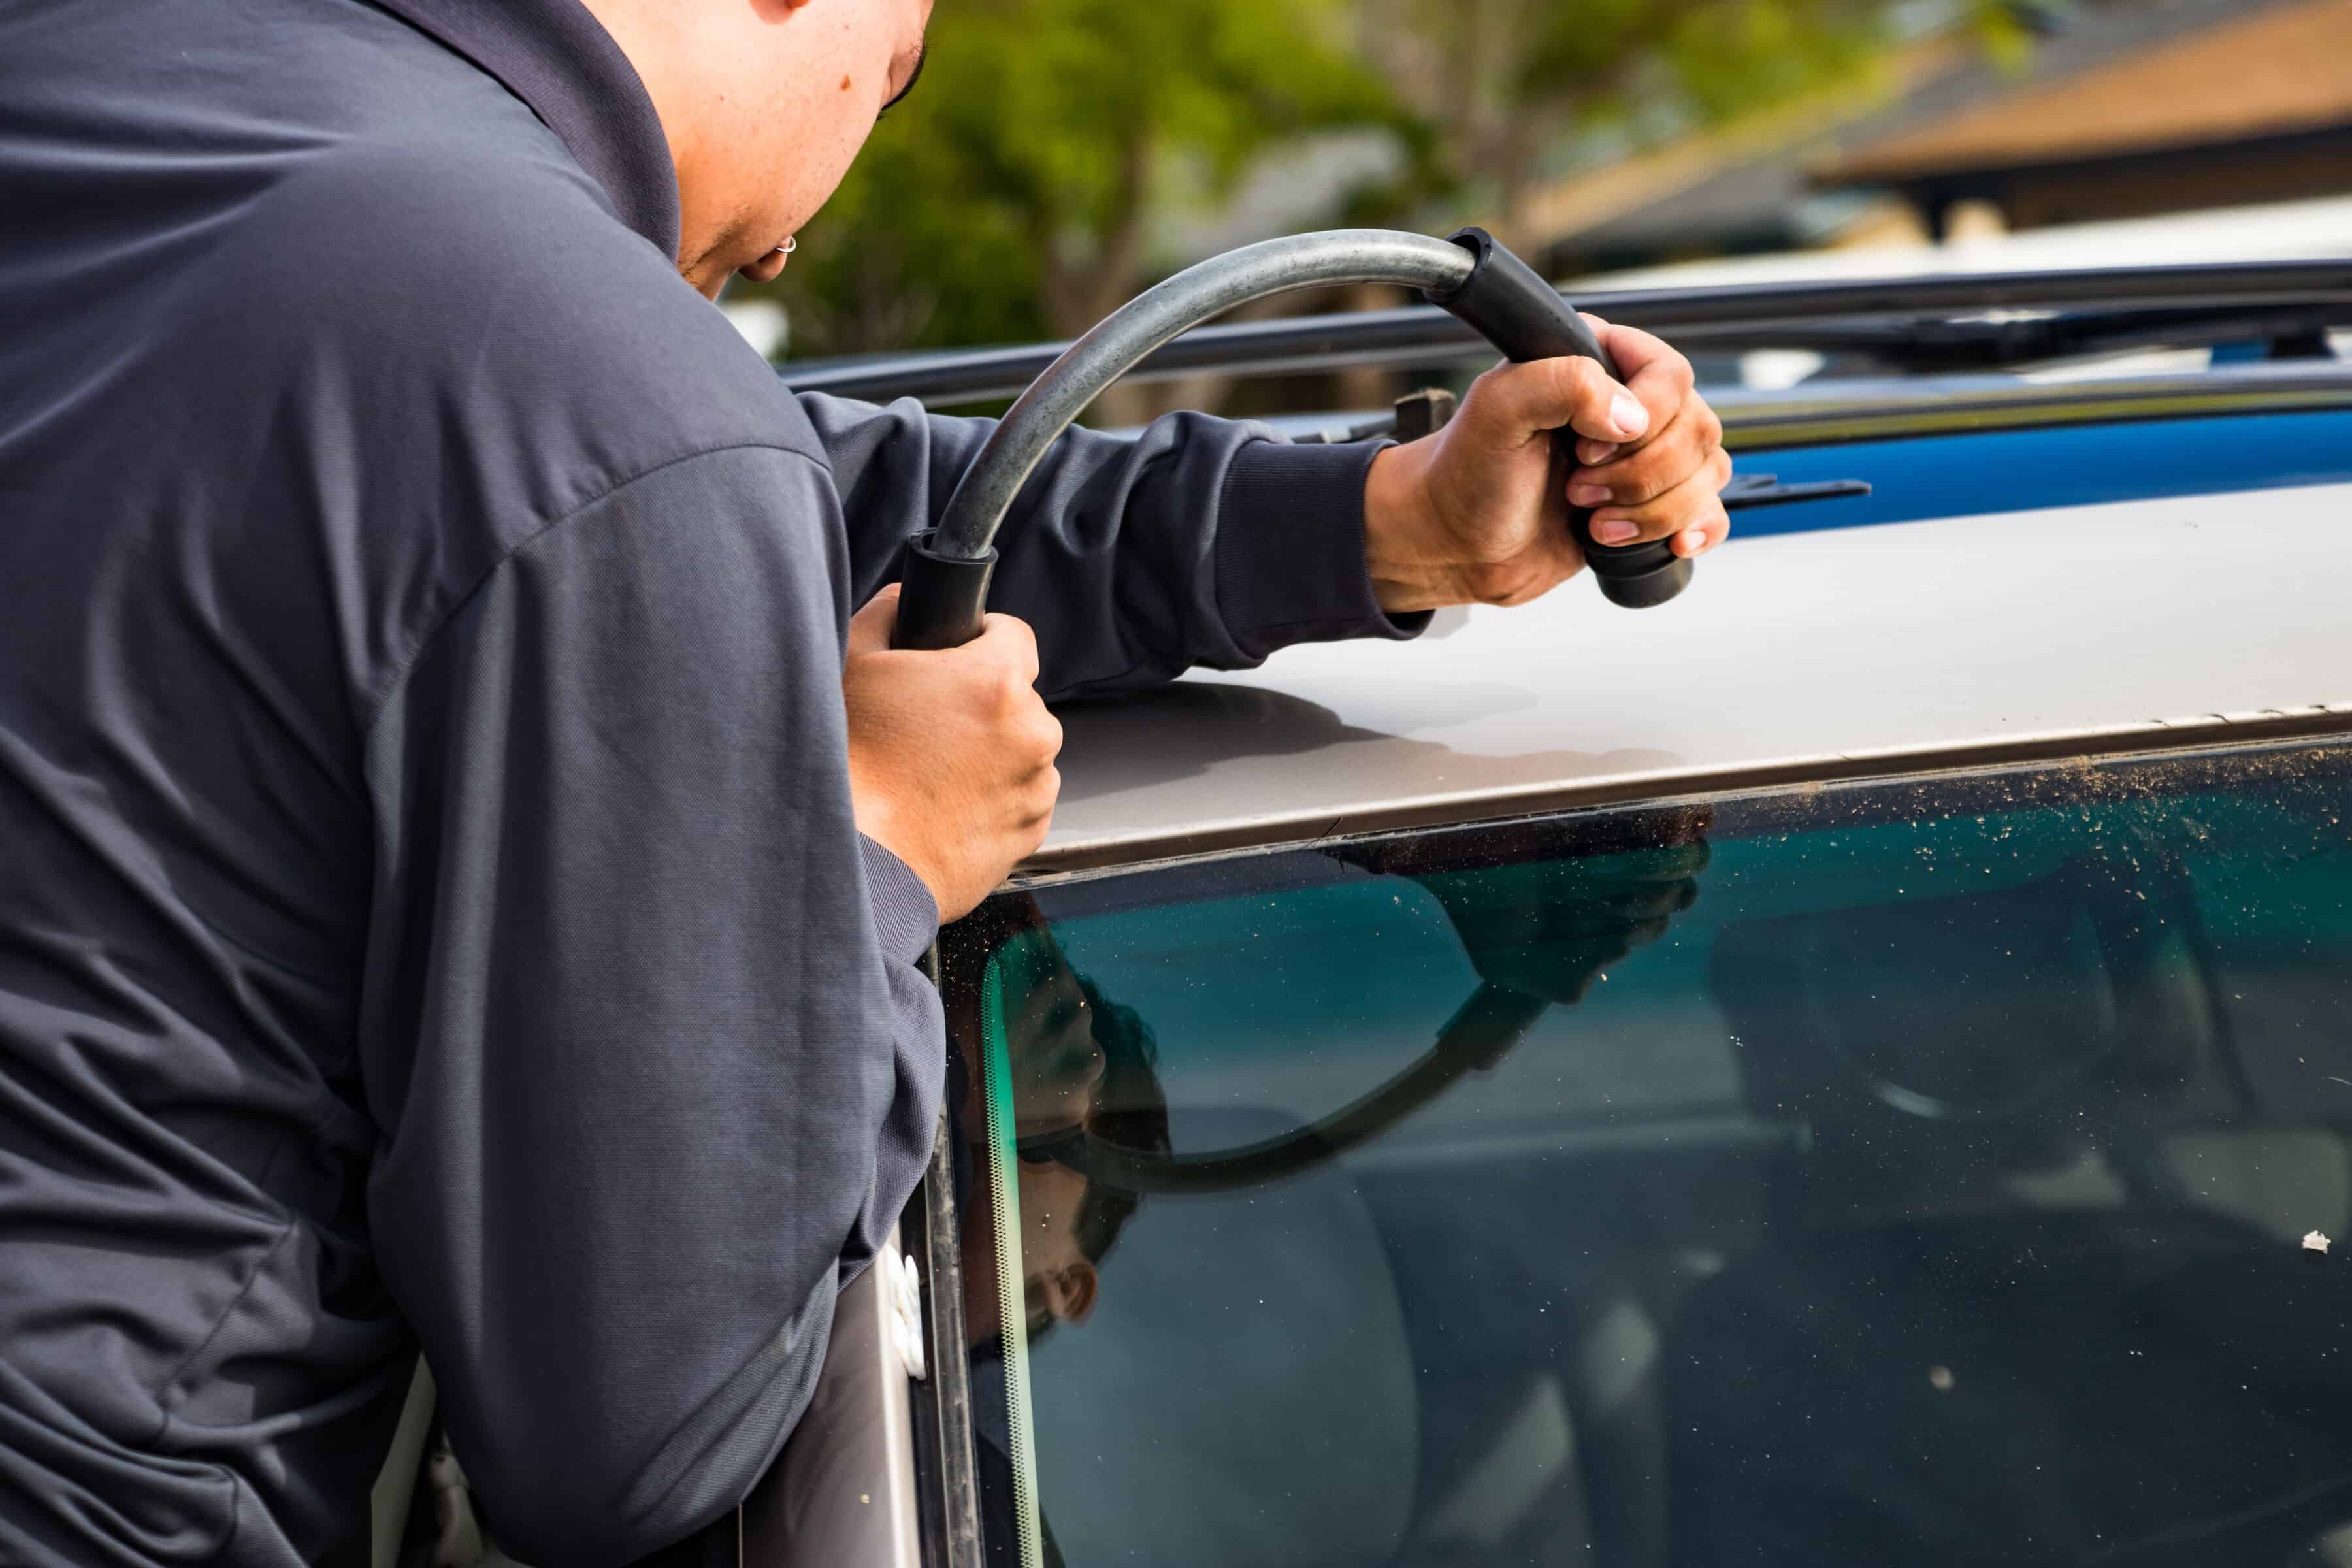 Windshield Repair And Replacement - Ideas For Your Family's Safety